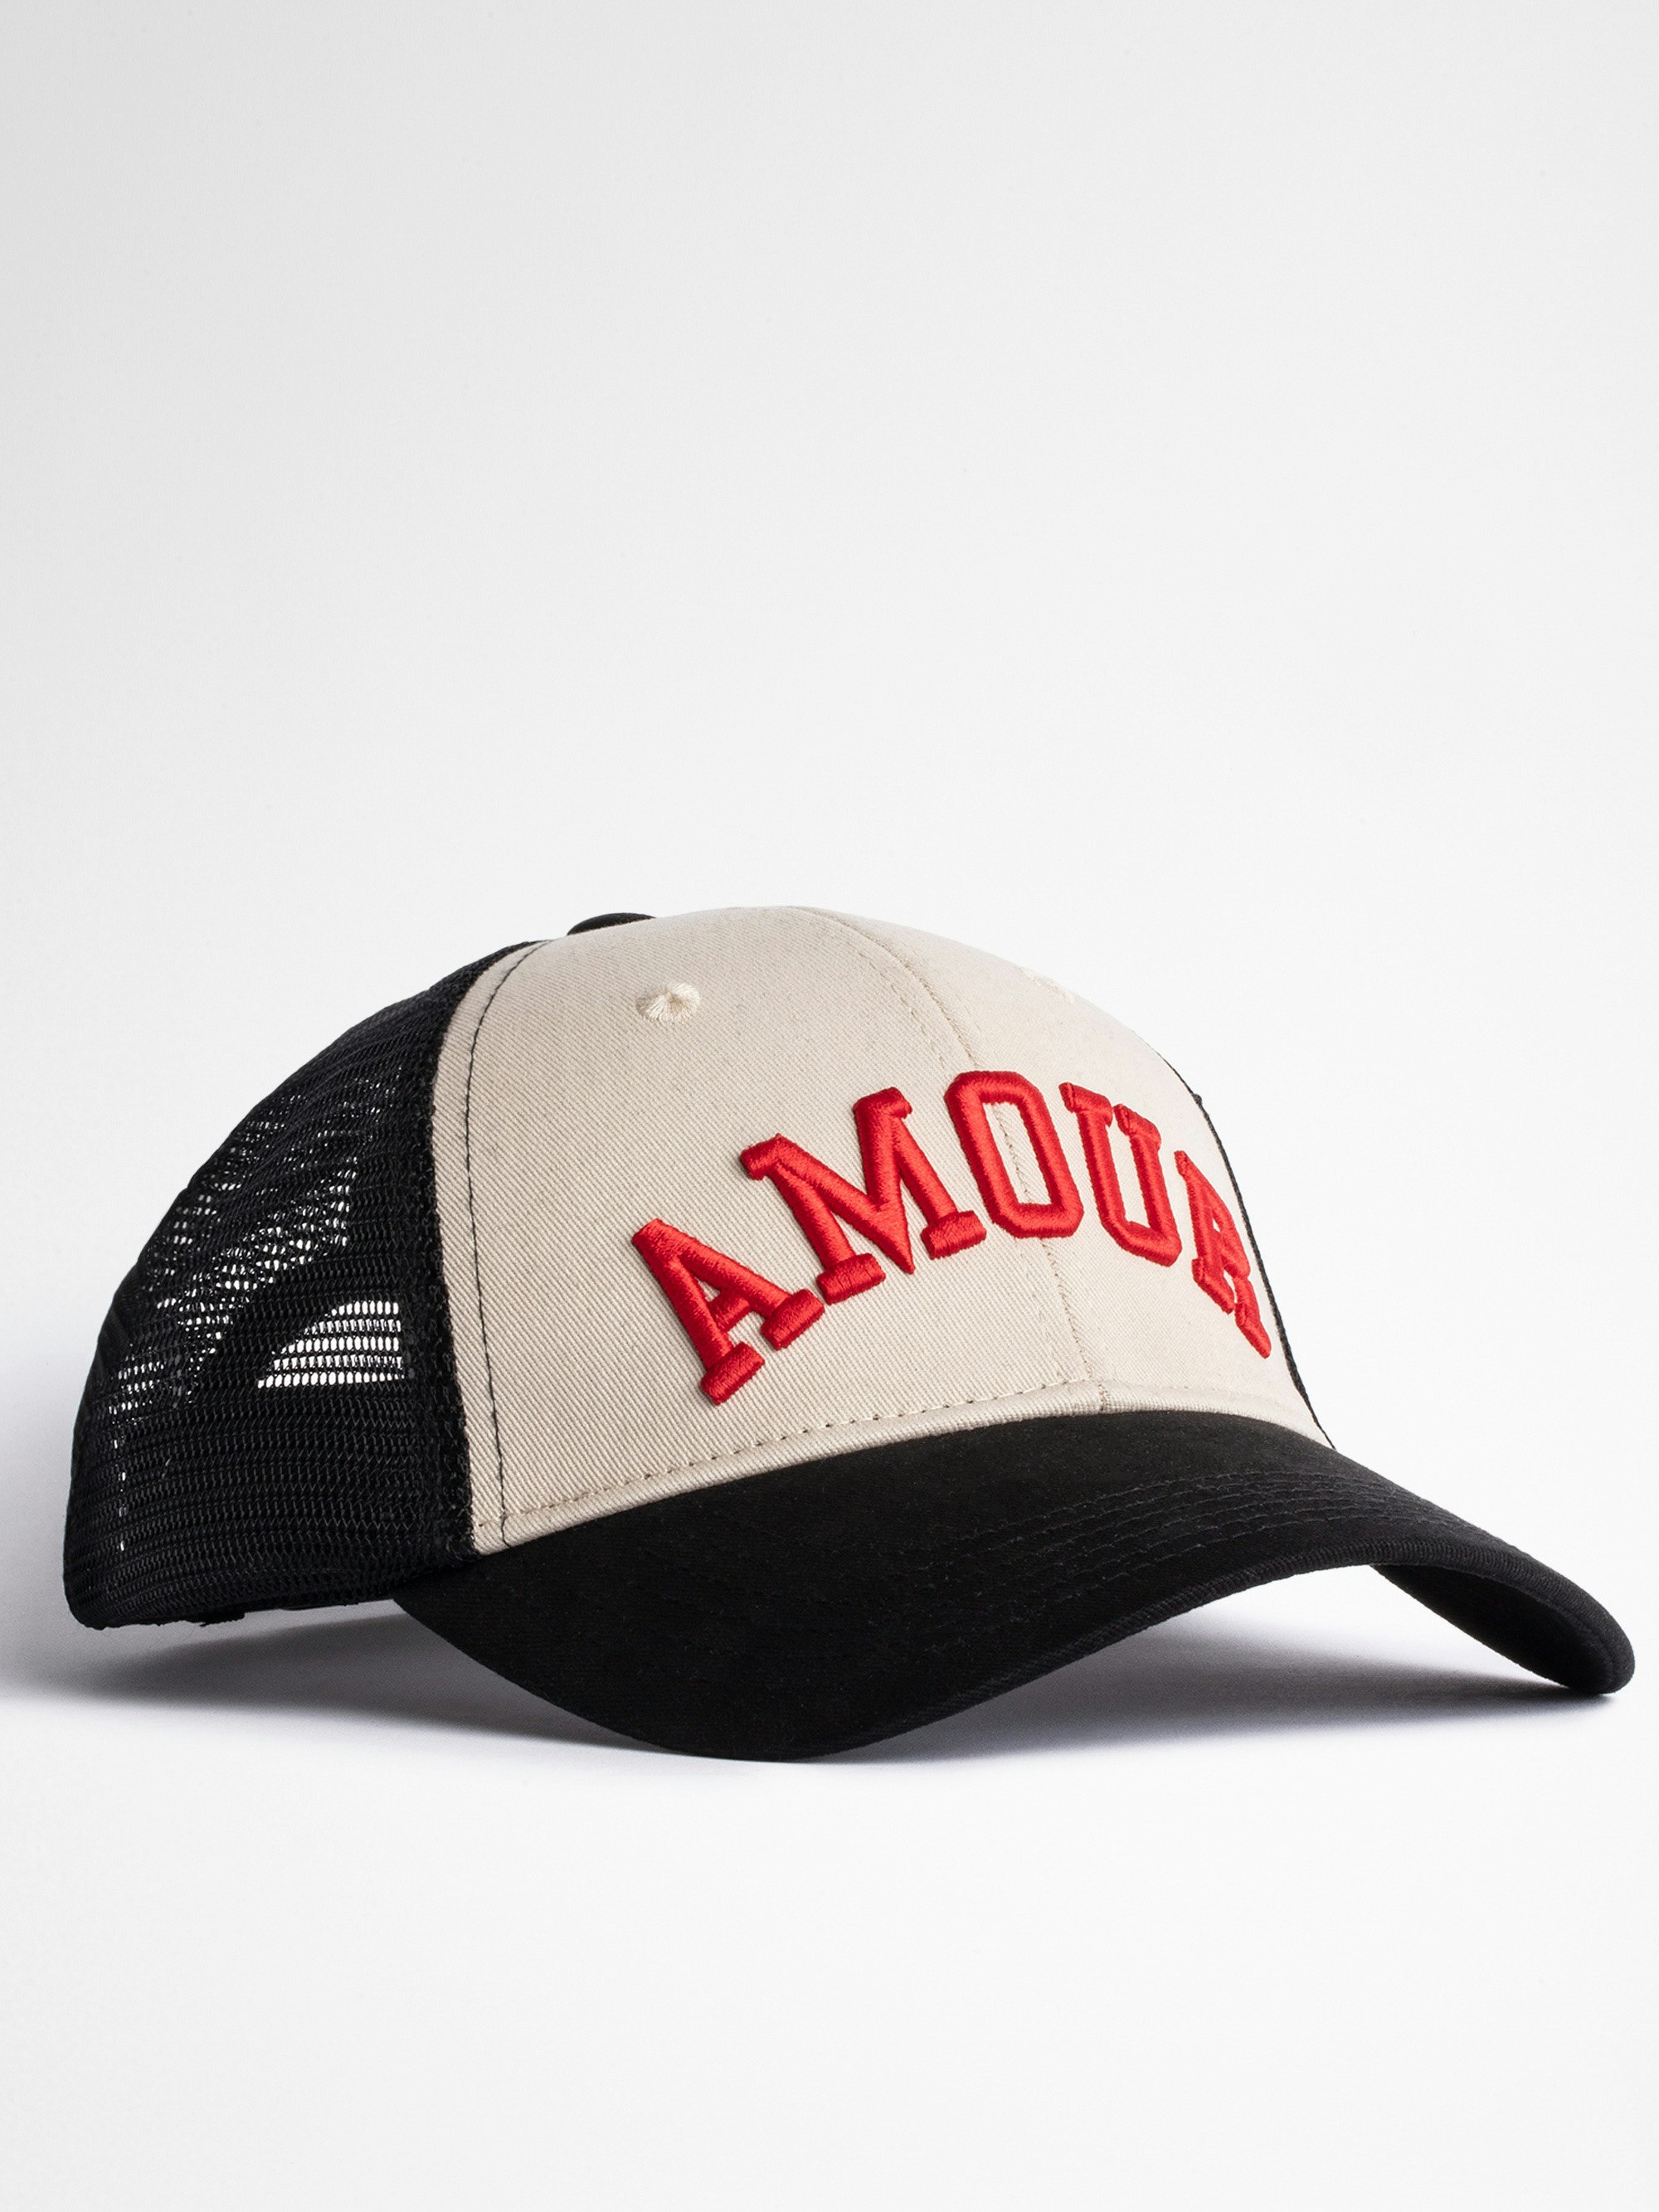 Klelia Amour Cap - Women's black cap with AMOUR embroidered in red.